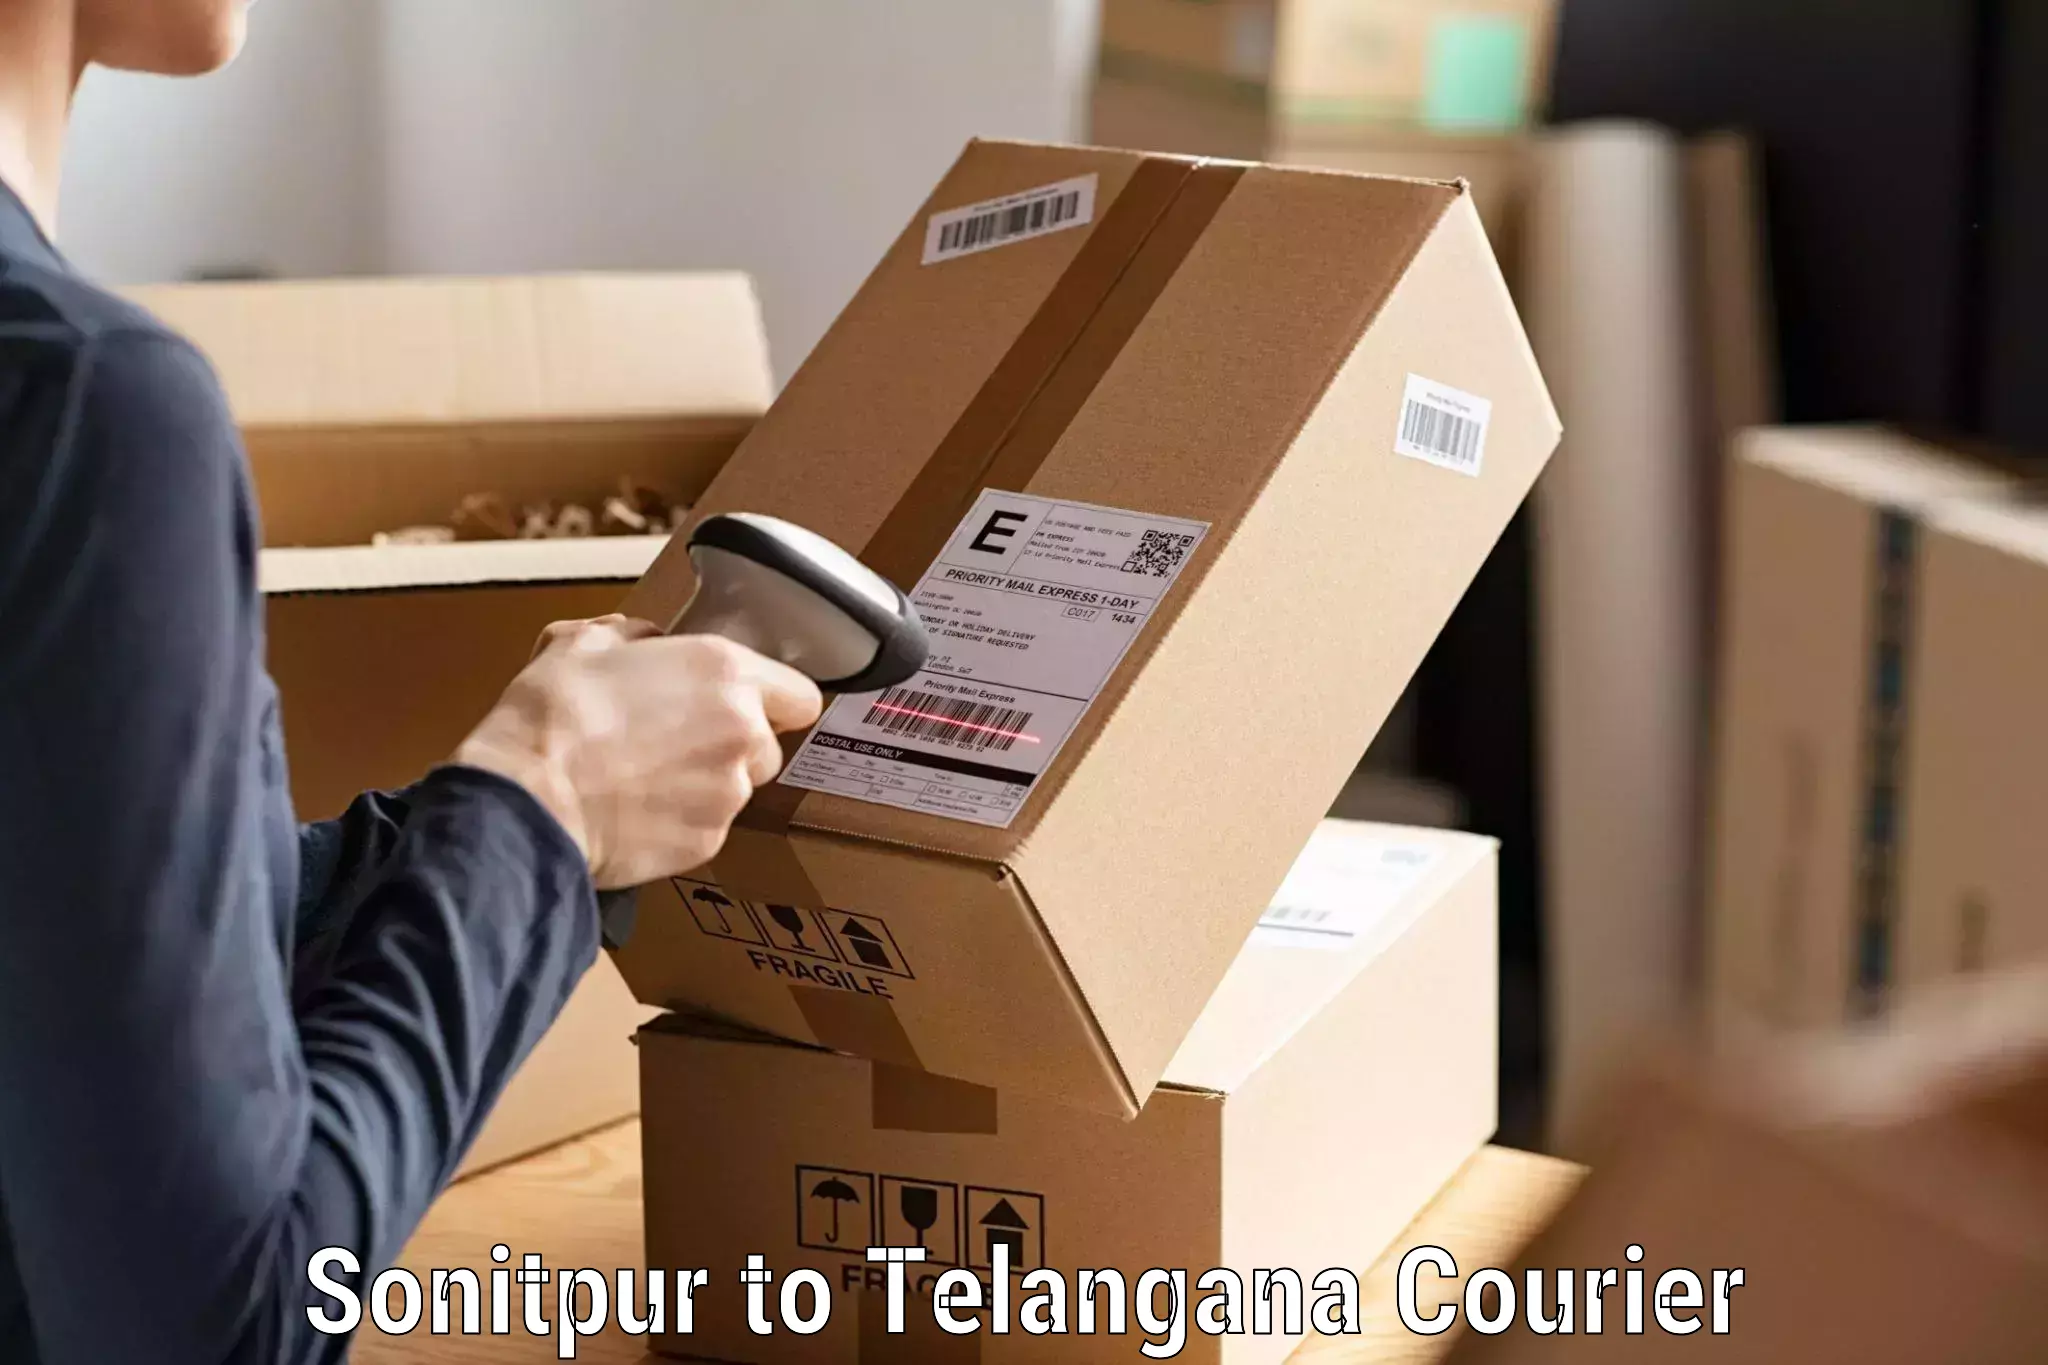 Advanced shipping services Sonitpur to Hyderabad